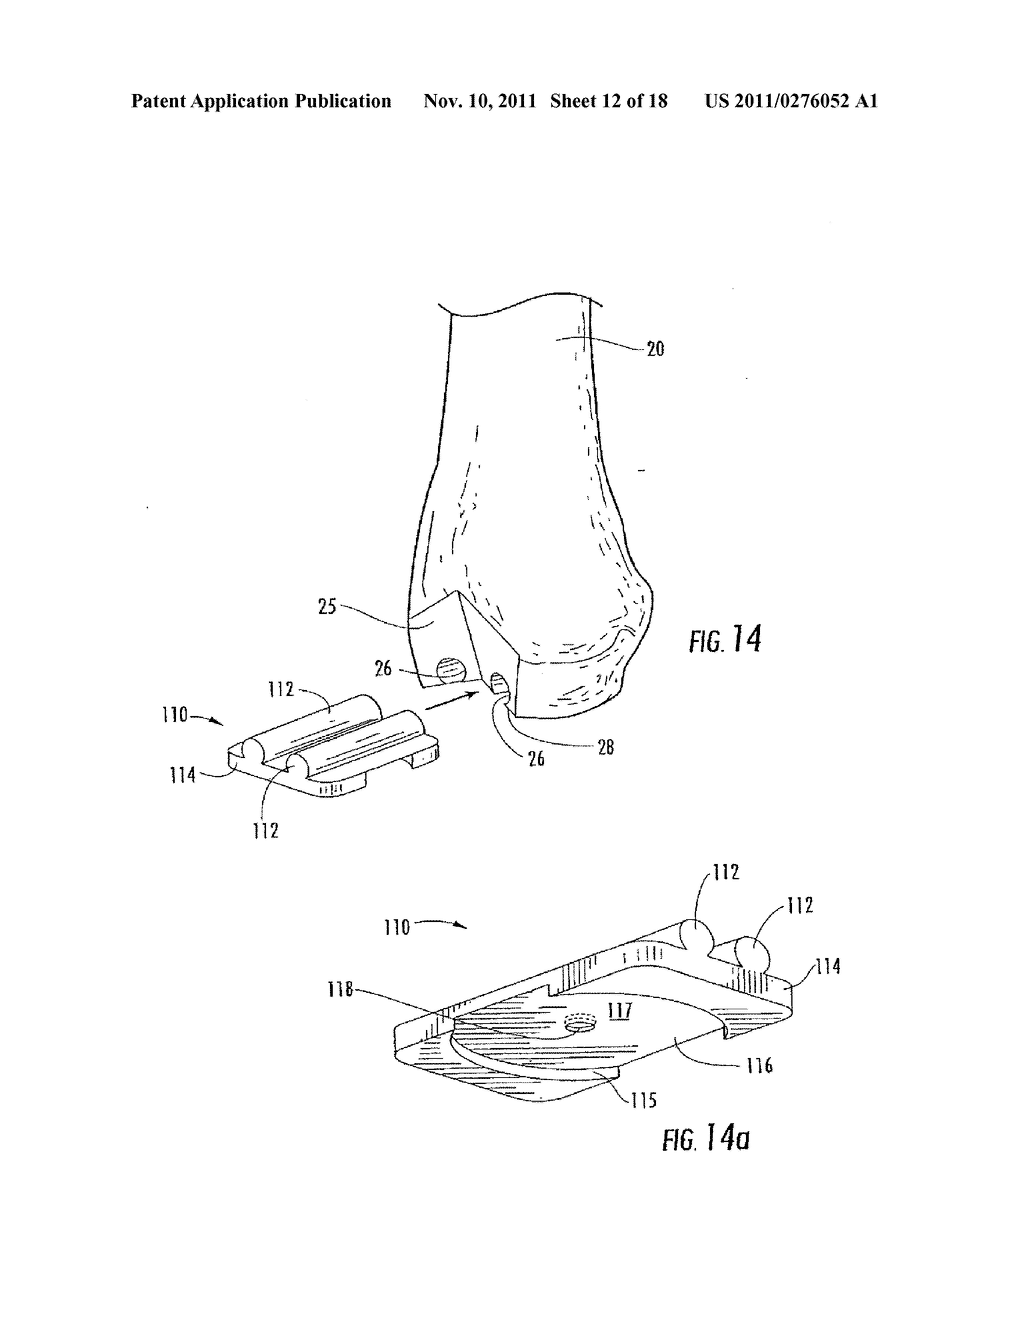 Method of Preparing an Ankle Joint for Replacement, Joint Prosthesis, and     Cutting Alignment Apparatus for Use in Performing an Arthroplasty     Procedure - diagram, schematic, and image 13